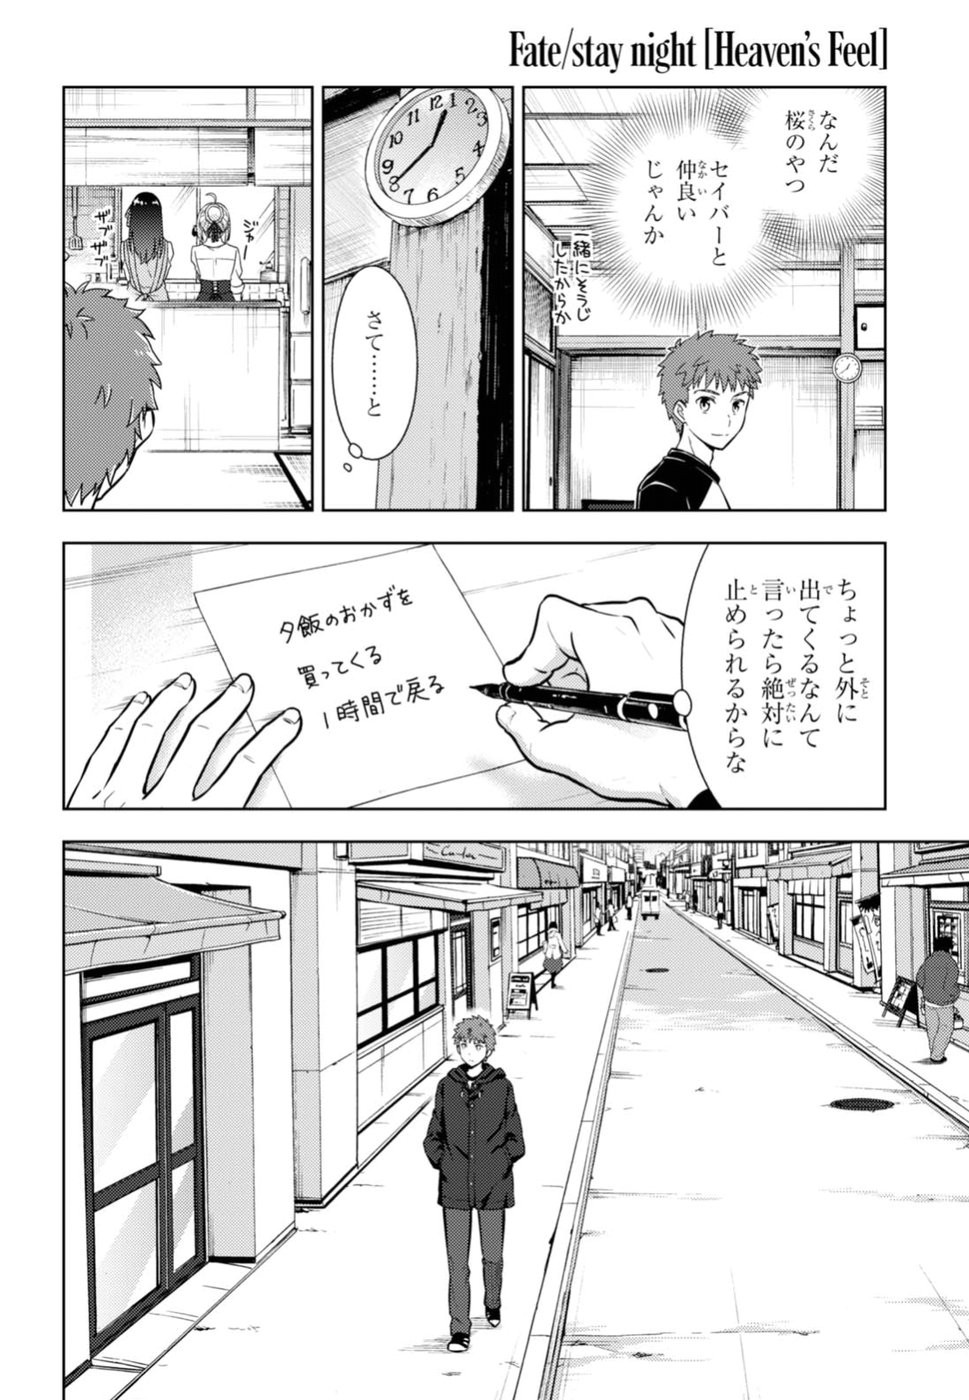 Fate/Stay night Heaven's Feel - Chapter 34 - Page 4